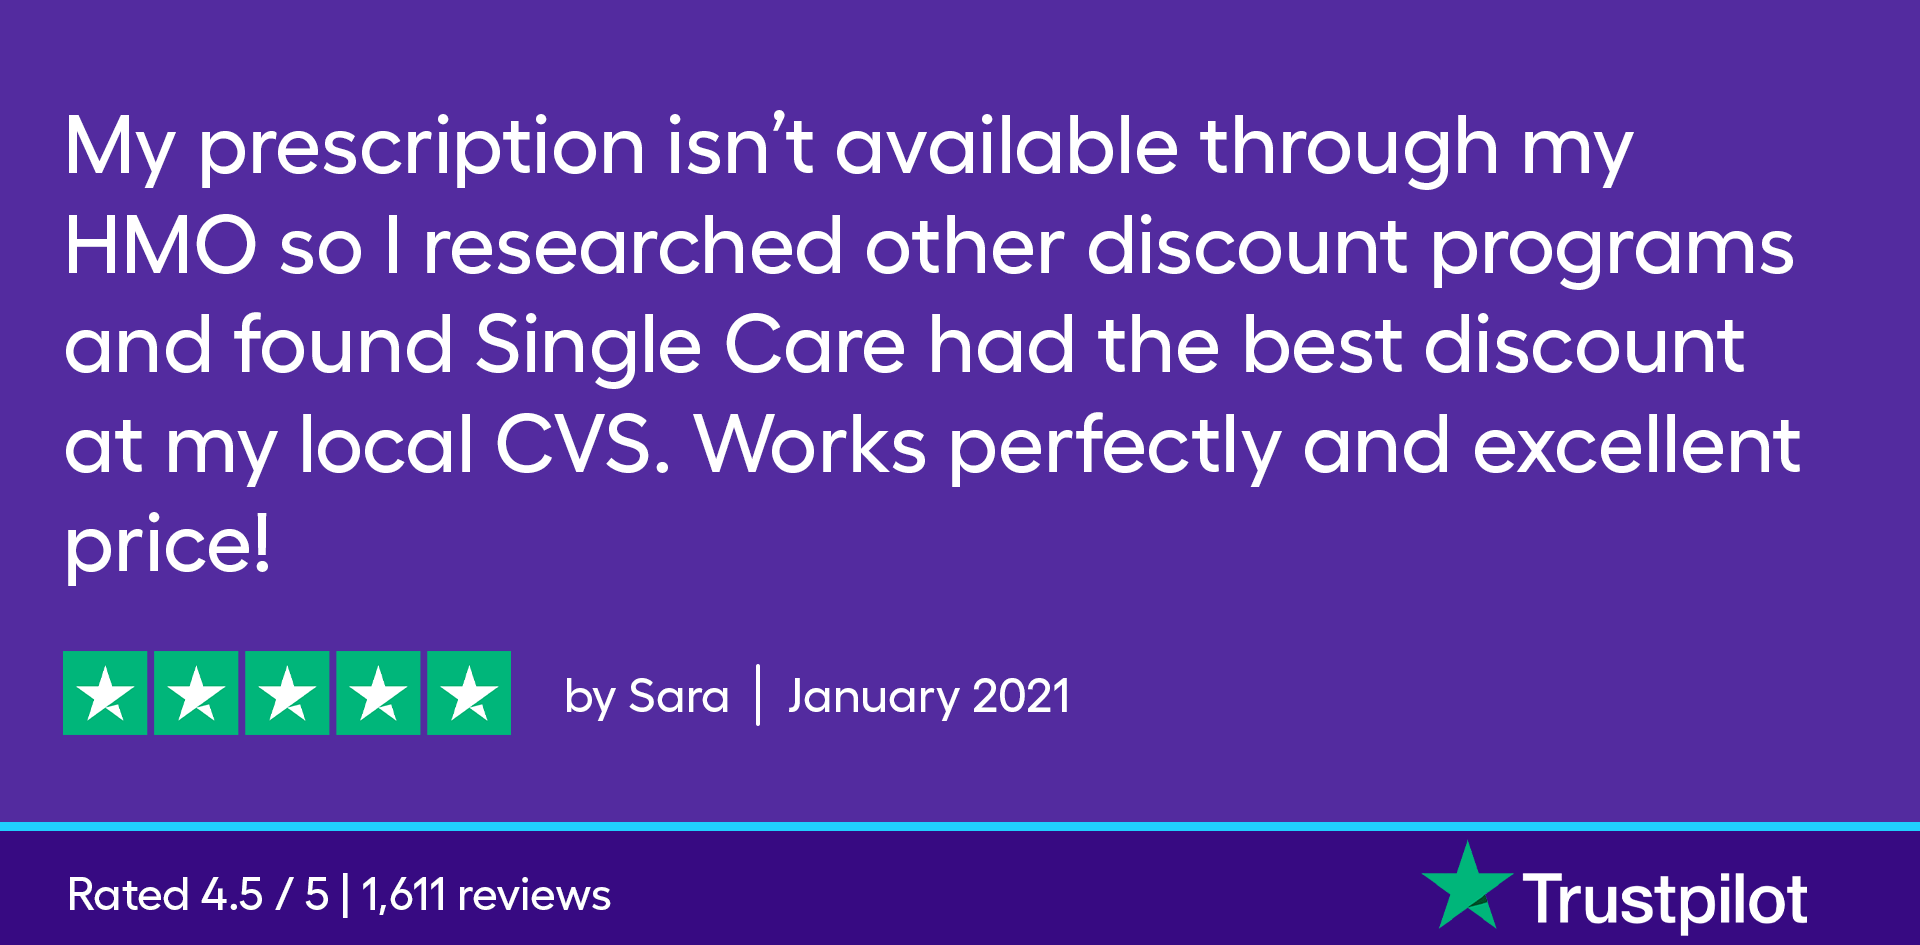 My prescription isn’t available through my HMO so I researched other discount programs and found SingleCare had the best discount at my local CVS. Works perfectly and excellent price!